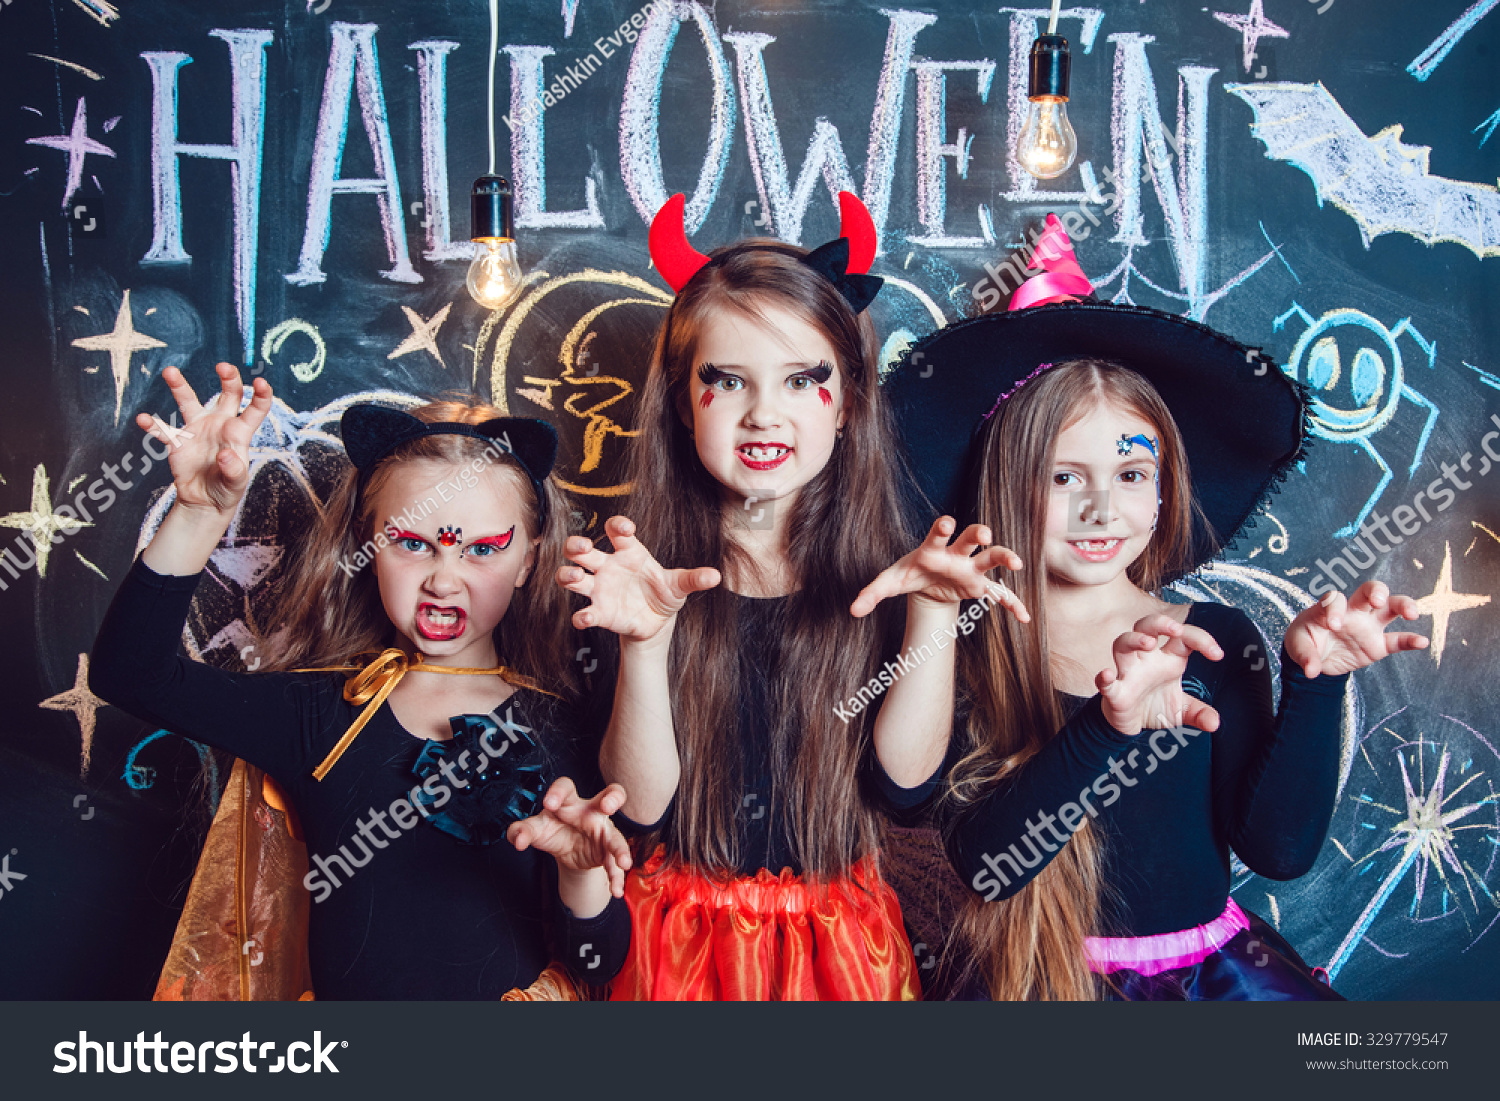 Girls, Dressed Up In Halloween Costumes, Show Emotions Of Witches ...